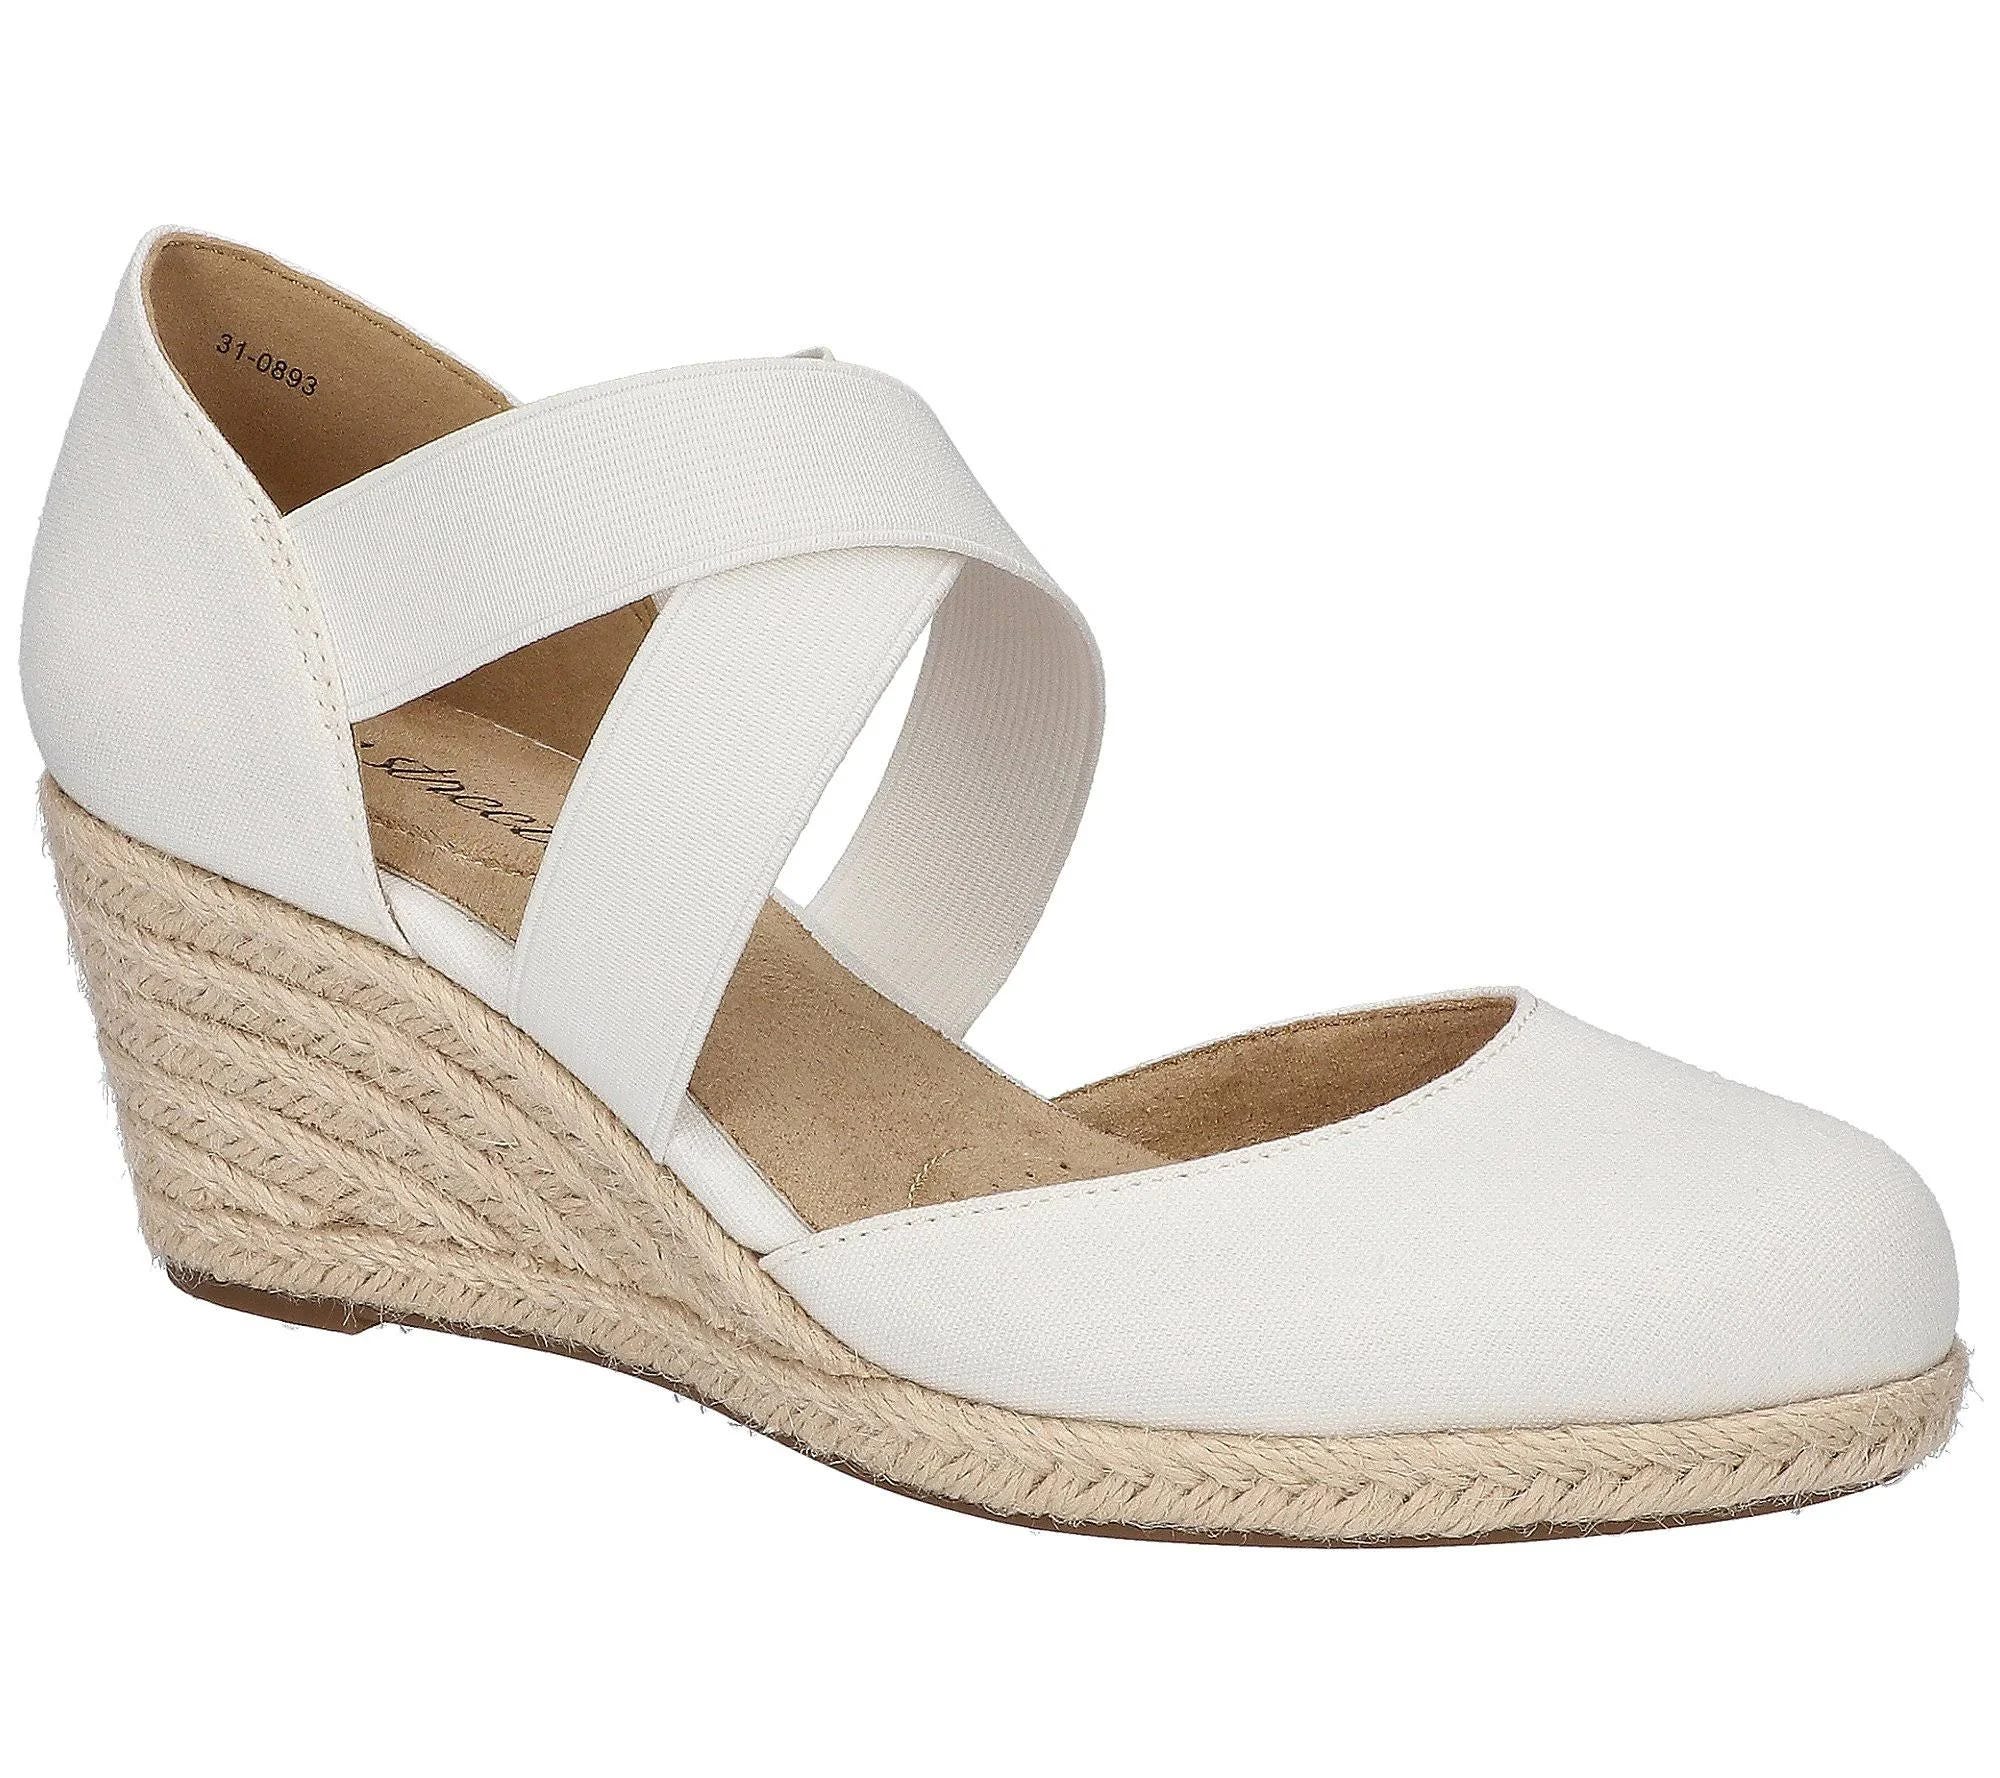 Comfortable White Espadrilles for Summer Fashion | Image